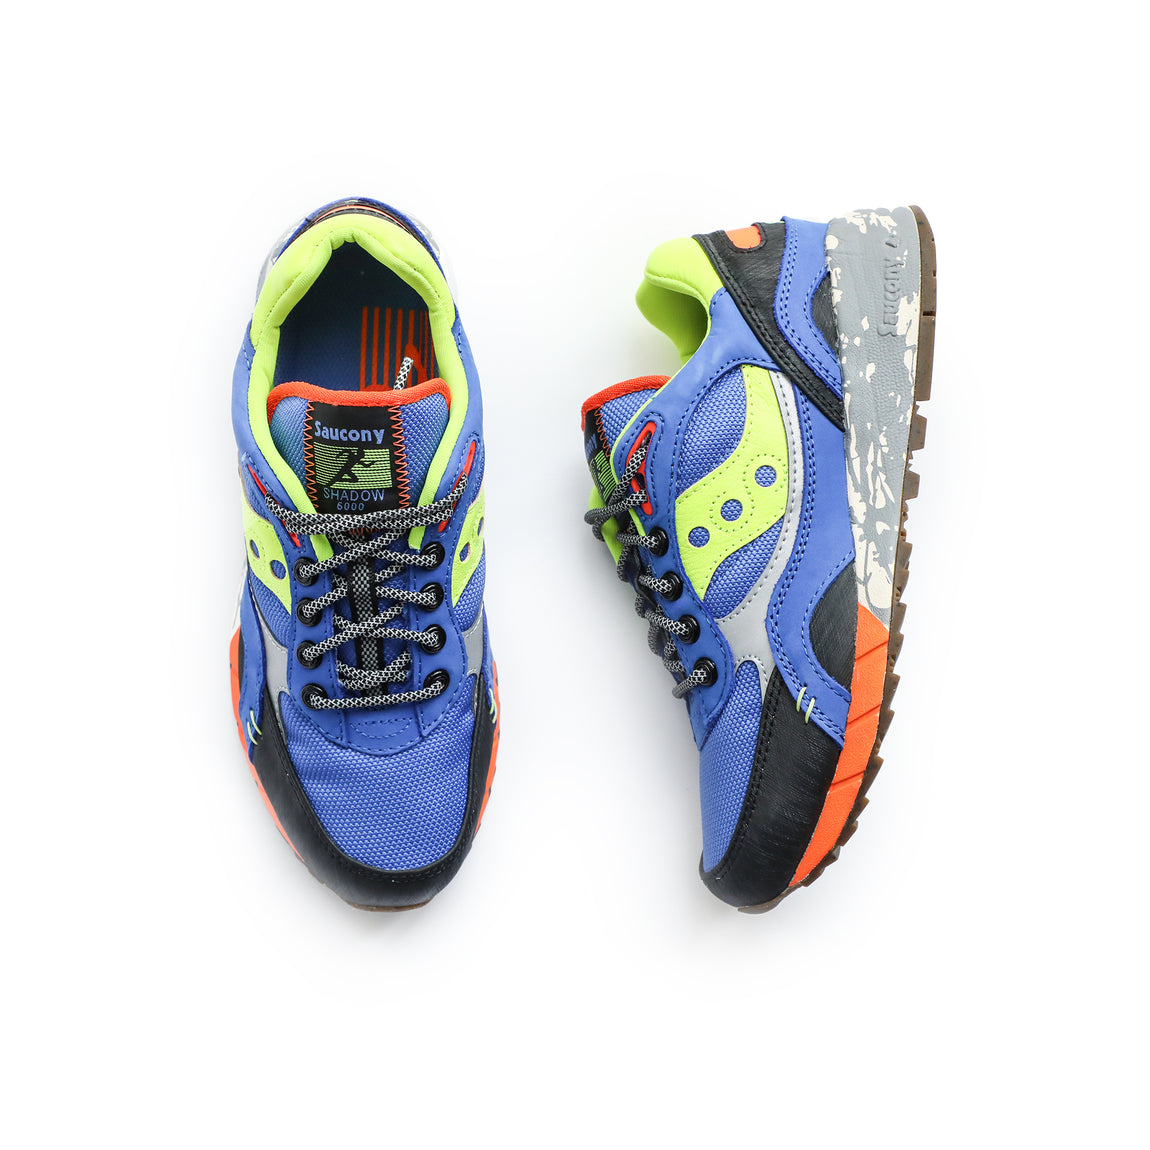 Saucony Shadow 6000 Trail CPK (Blue/Lime/Black) - Saucony Shadow 6000 Trail CPK (Blue/Lime/Black) - 